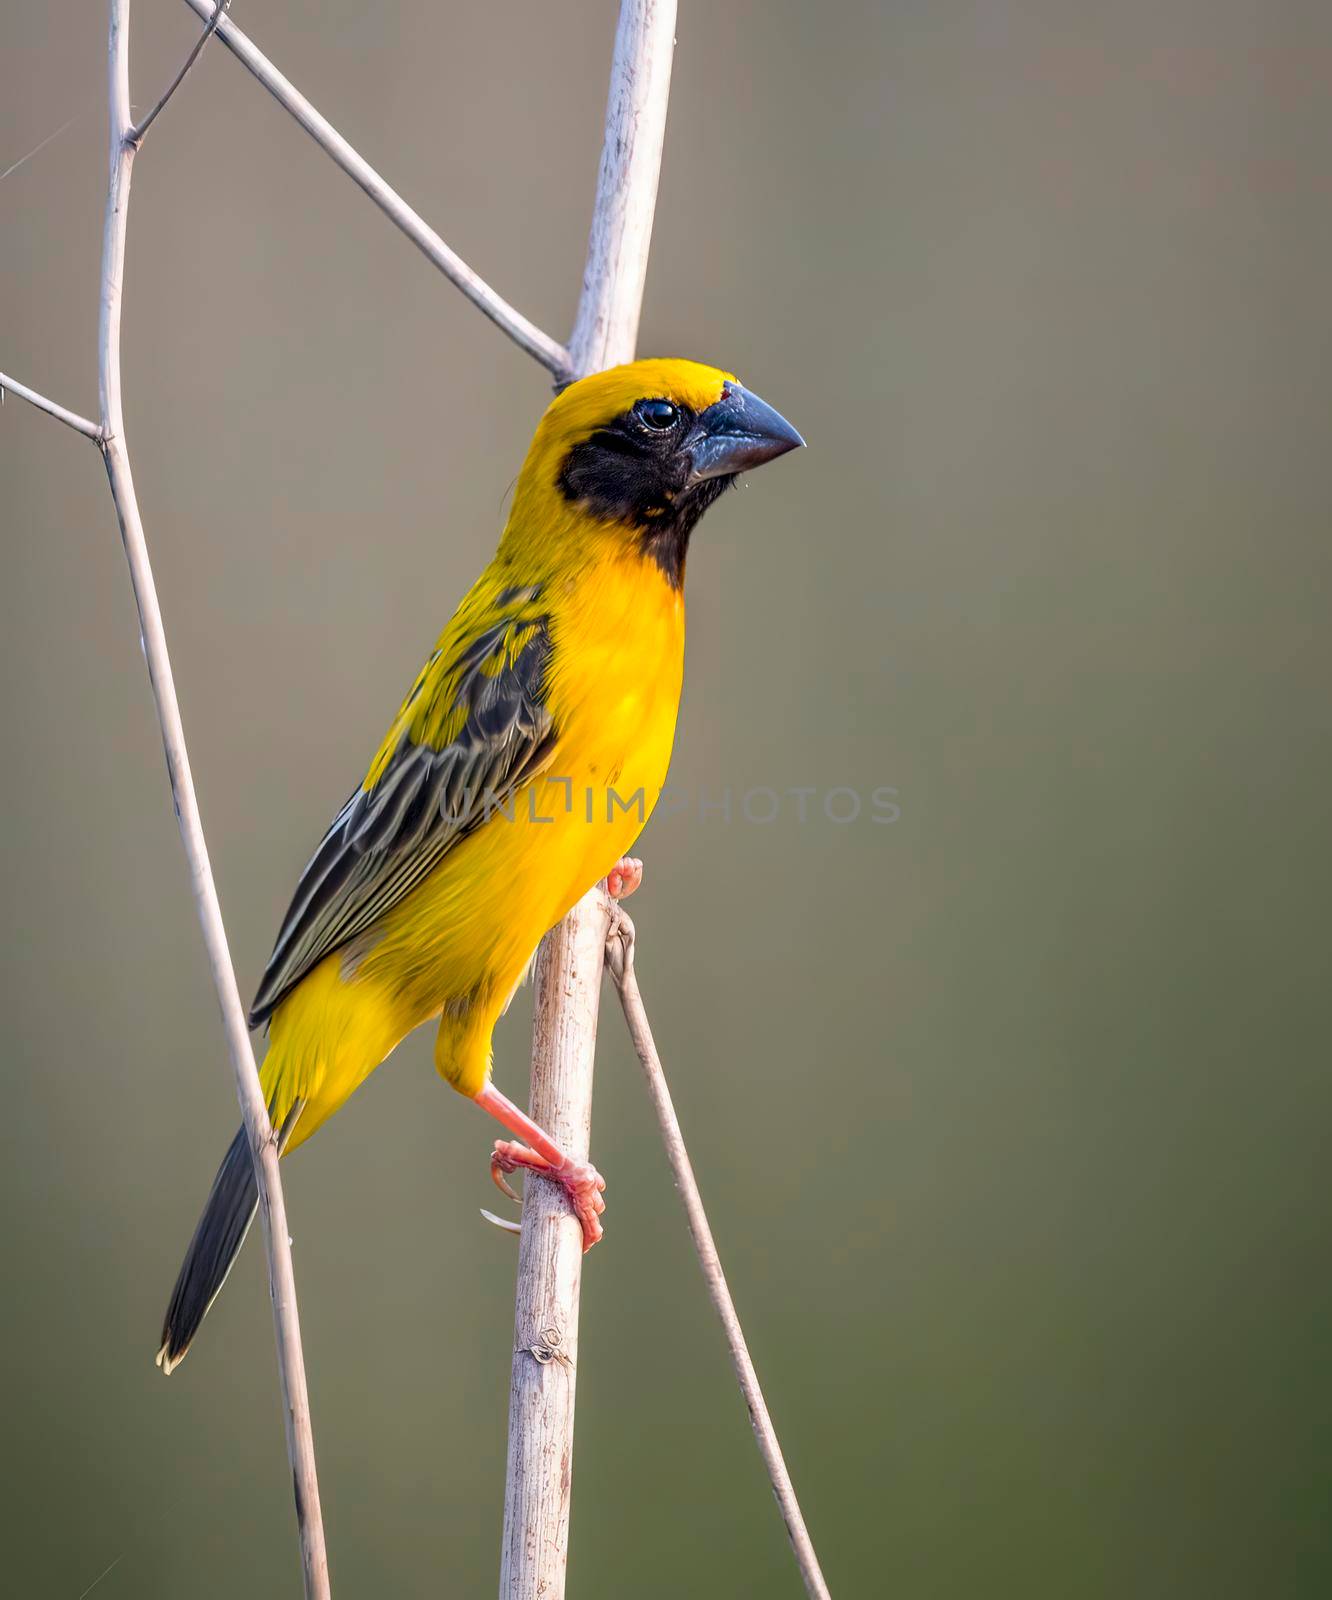 Image of bird (Asian golden weaver) on the branch on nature background. Wild Animals.